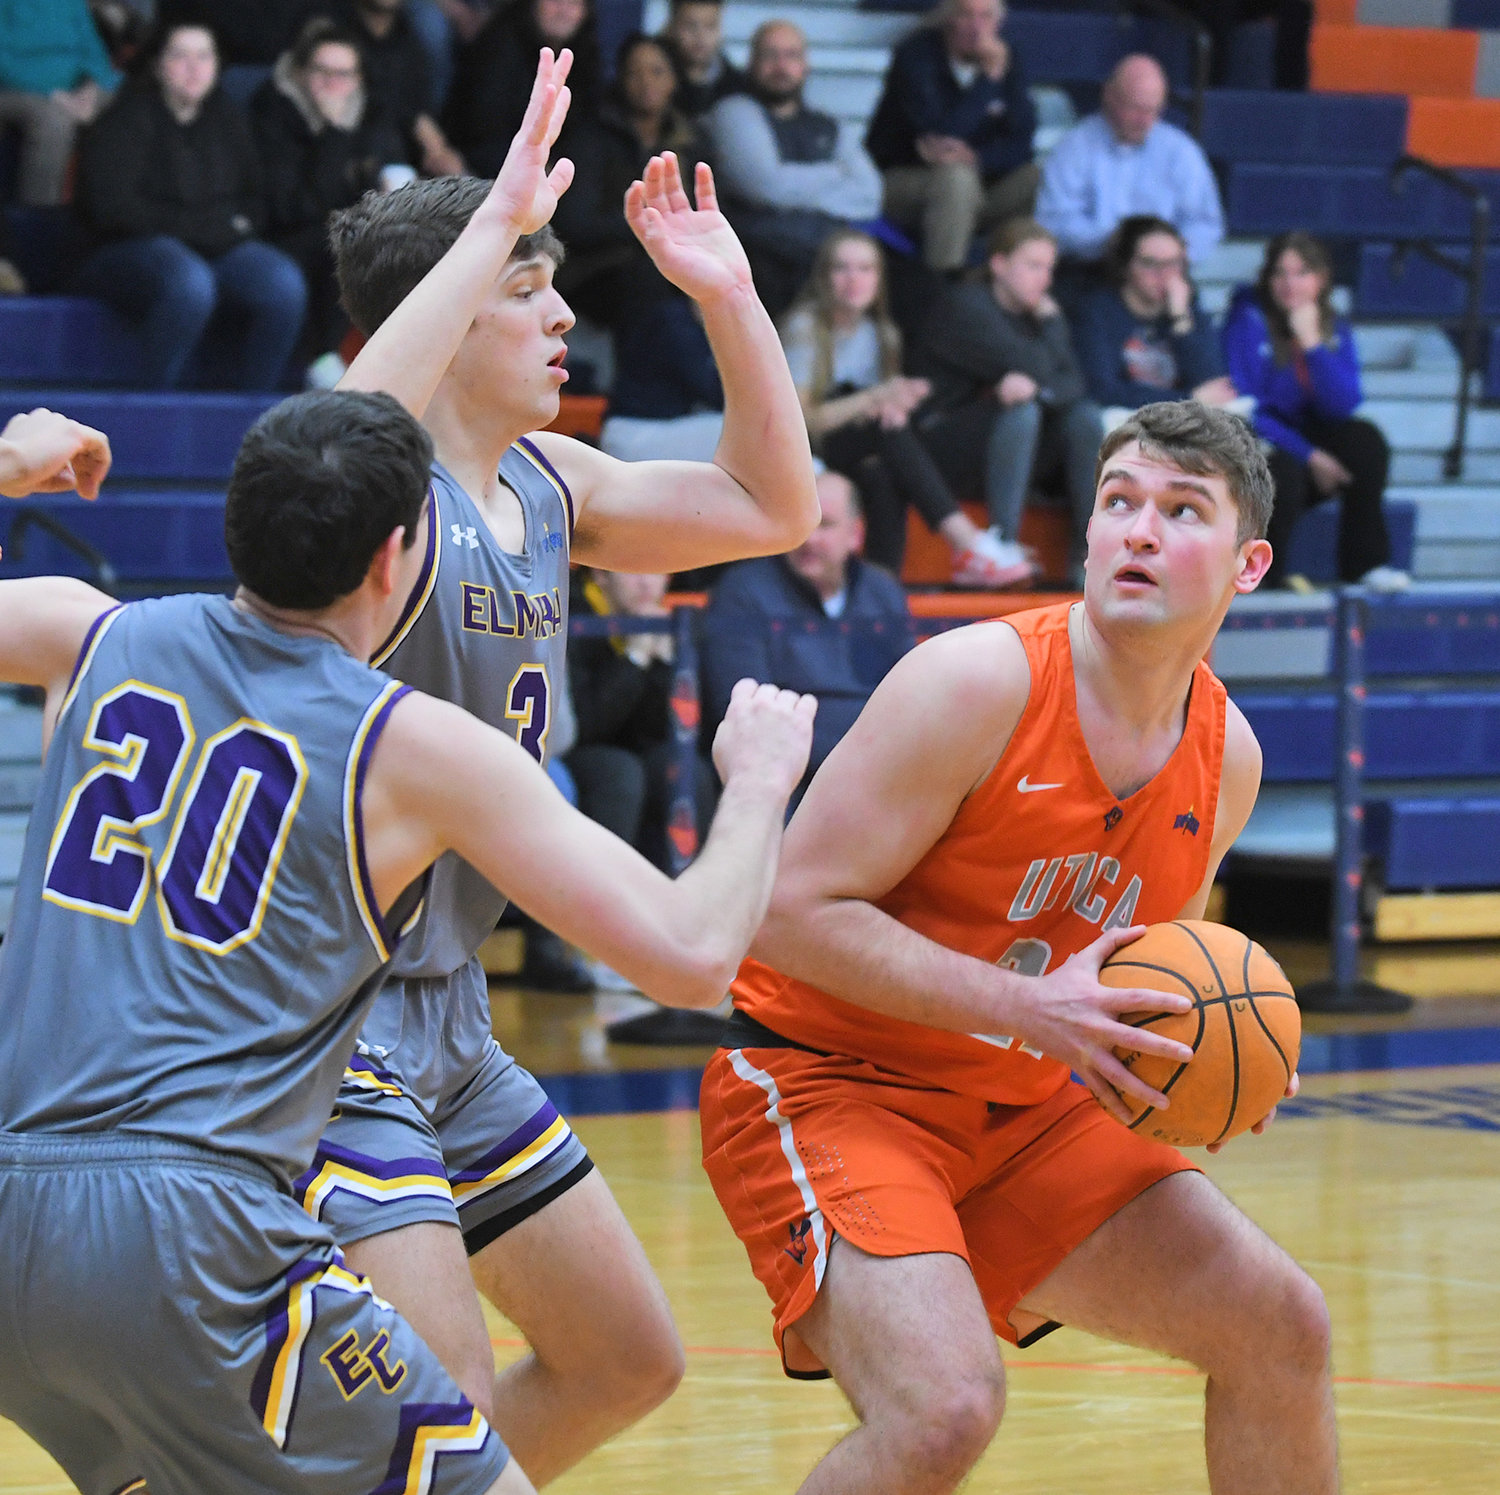 Utica University's Thomas Morreale goes up for a shot as Elmira's JJ Babcock (3) and Harry Ravitz (20) defend on Friday night in Empire 8 action in Utica.